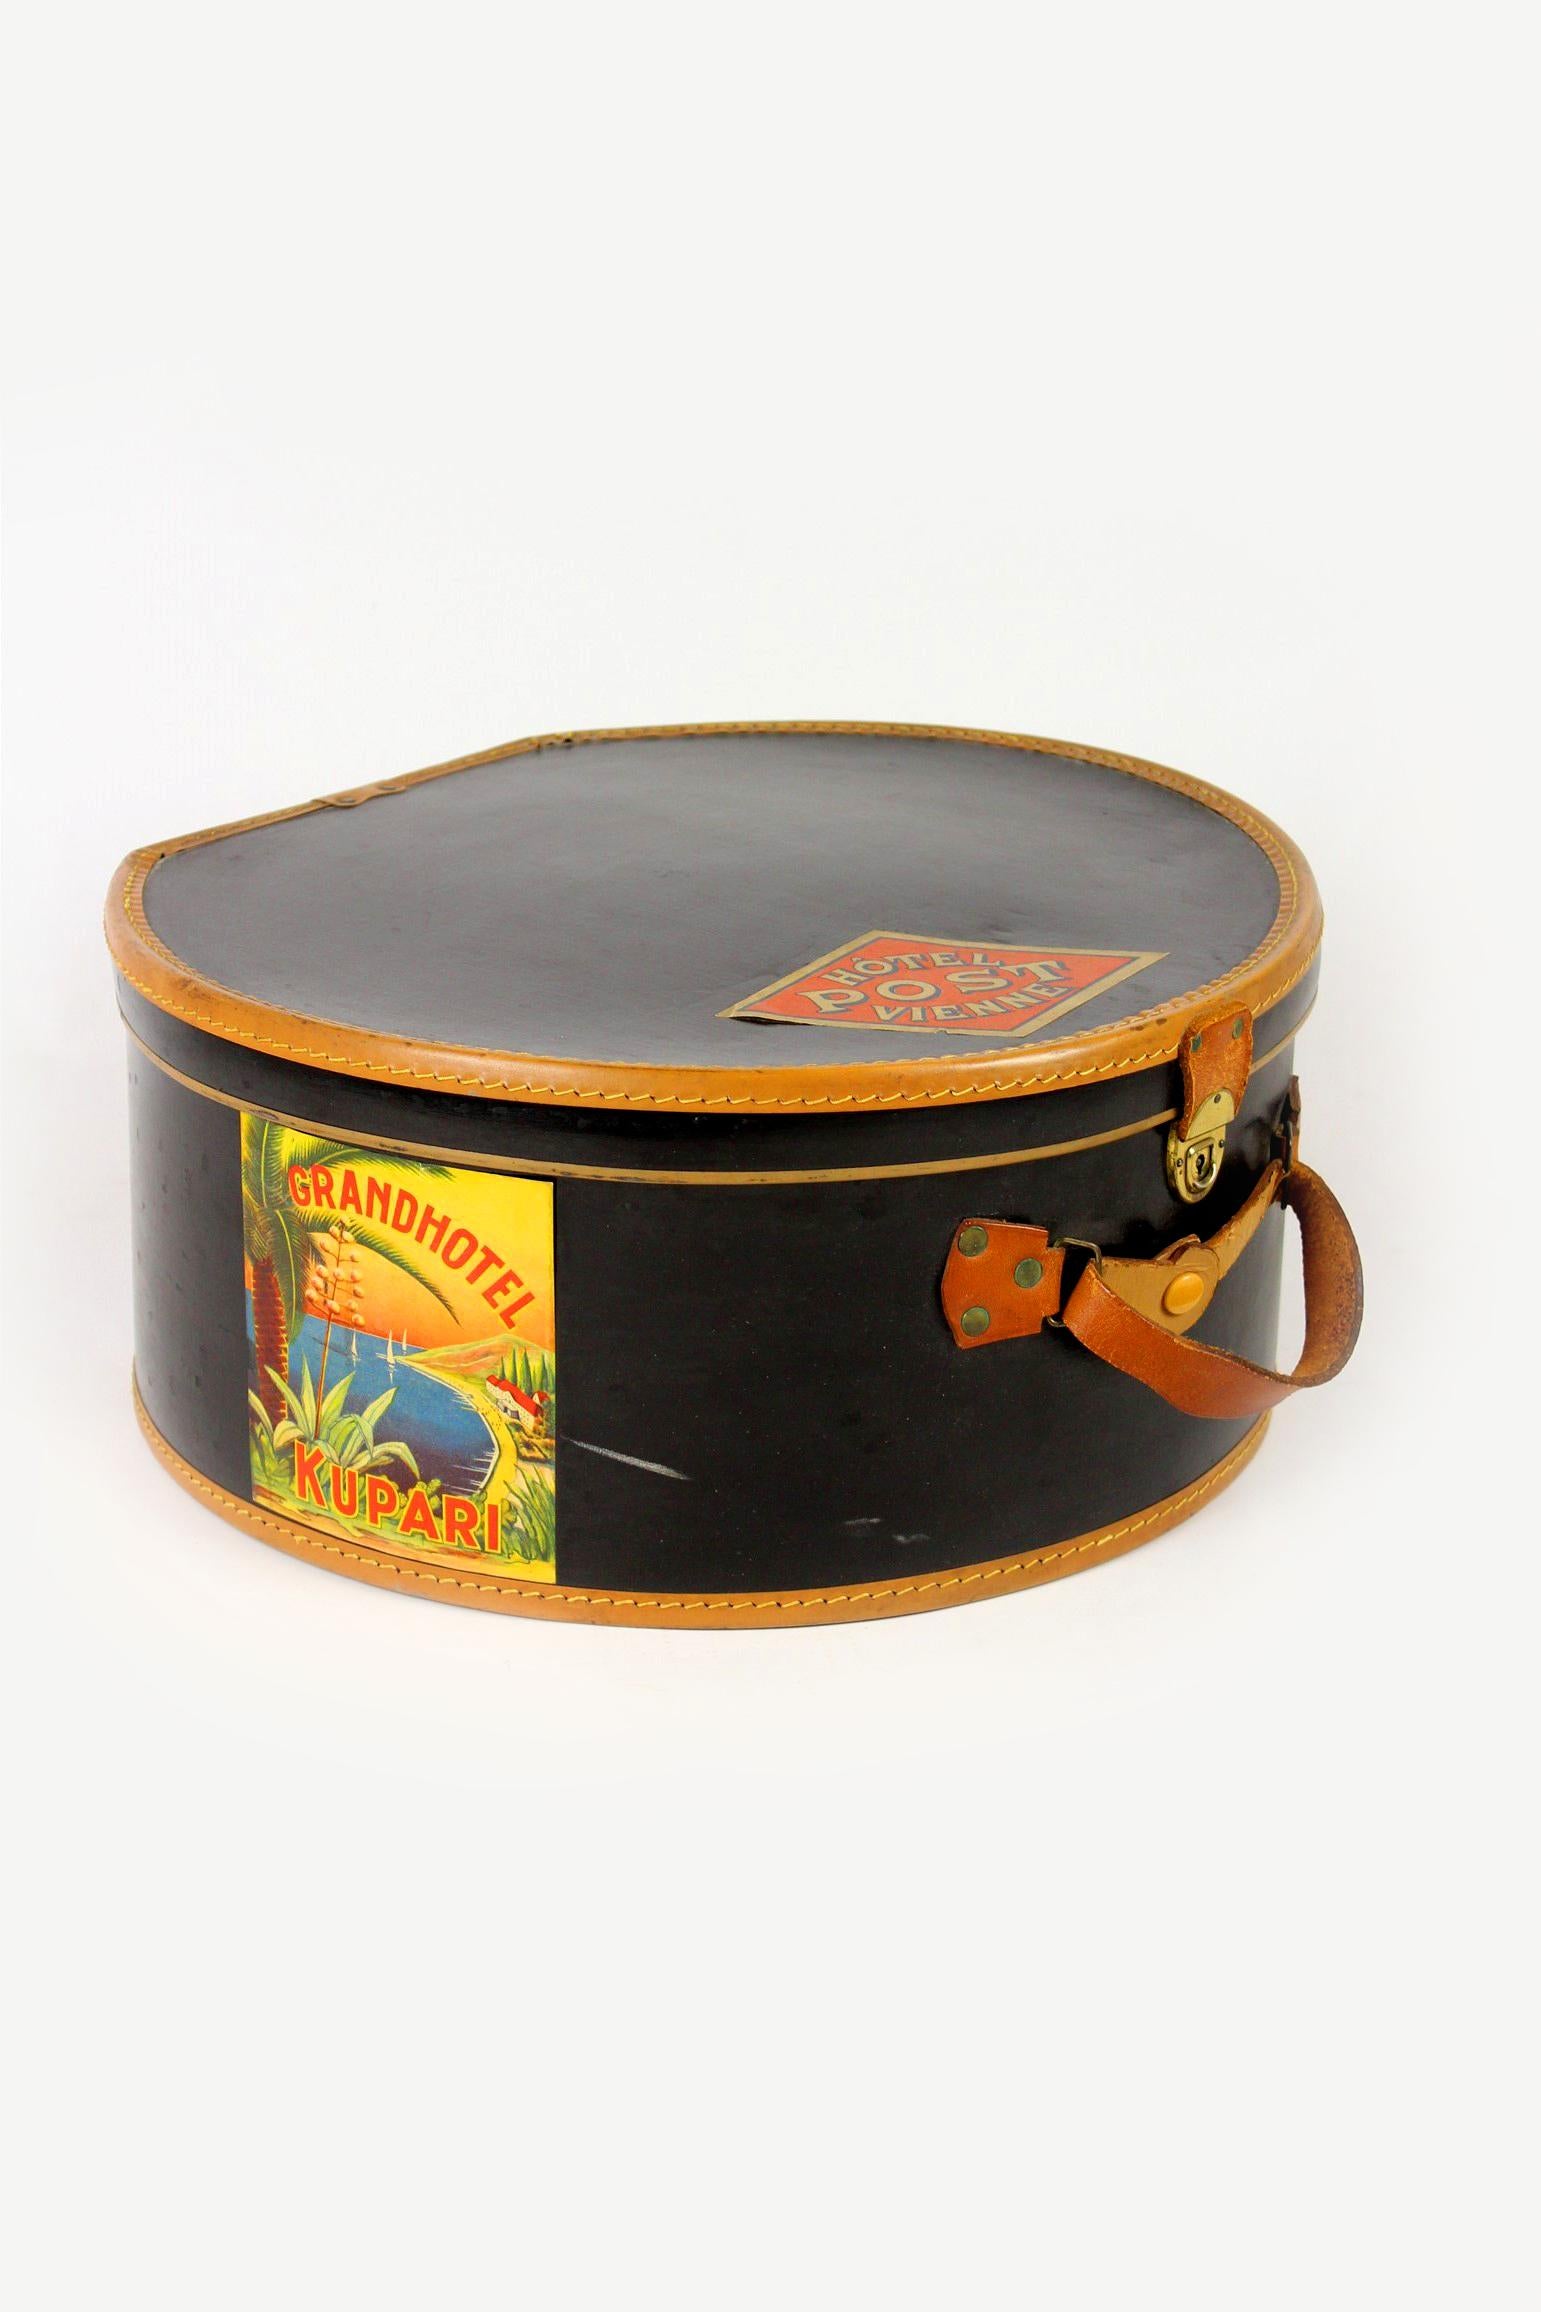 A leather hat box from the 1920s/1930s, comes from the Czech Republic, is in very good condition. It has original stickers from the POST Vienne hotel (Austria) and the Grand Hotel in Kupari (Croatia). The Grand Hotel was built in 1920 by the Czech